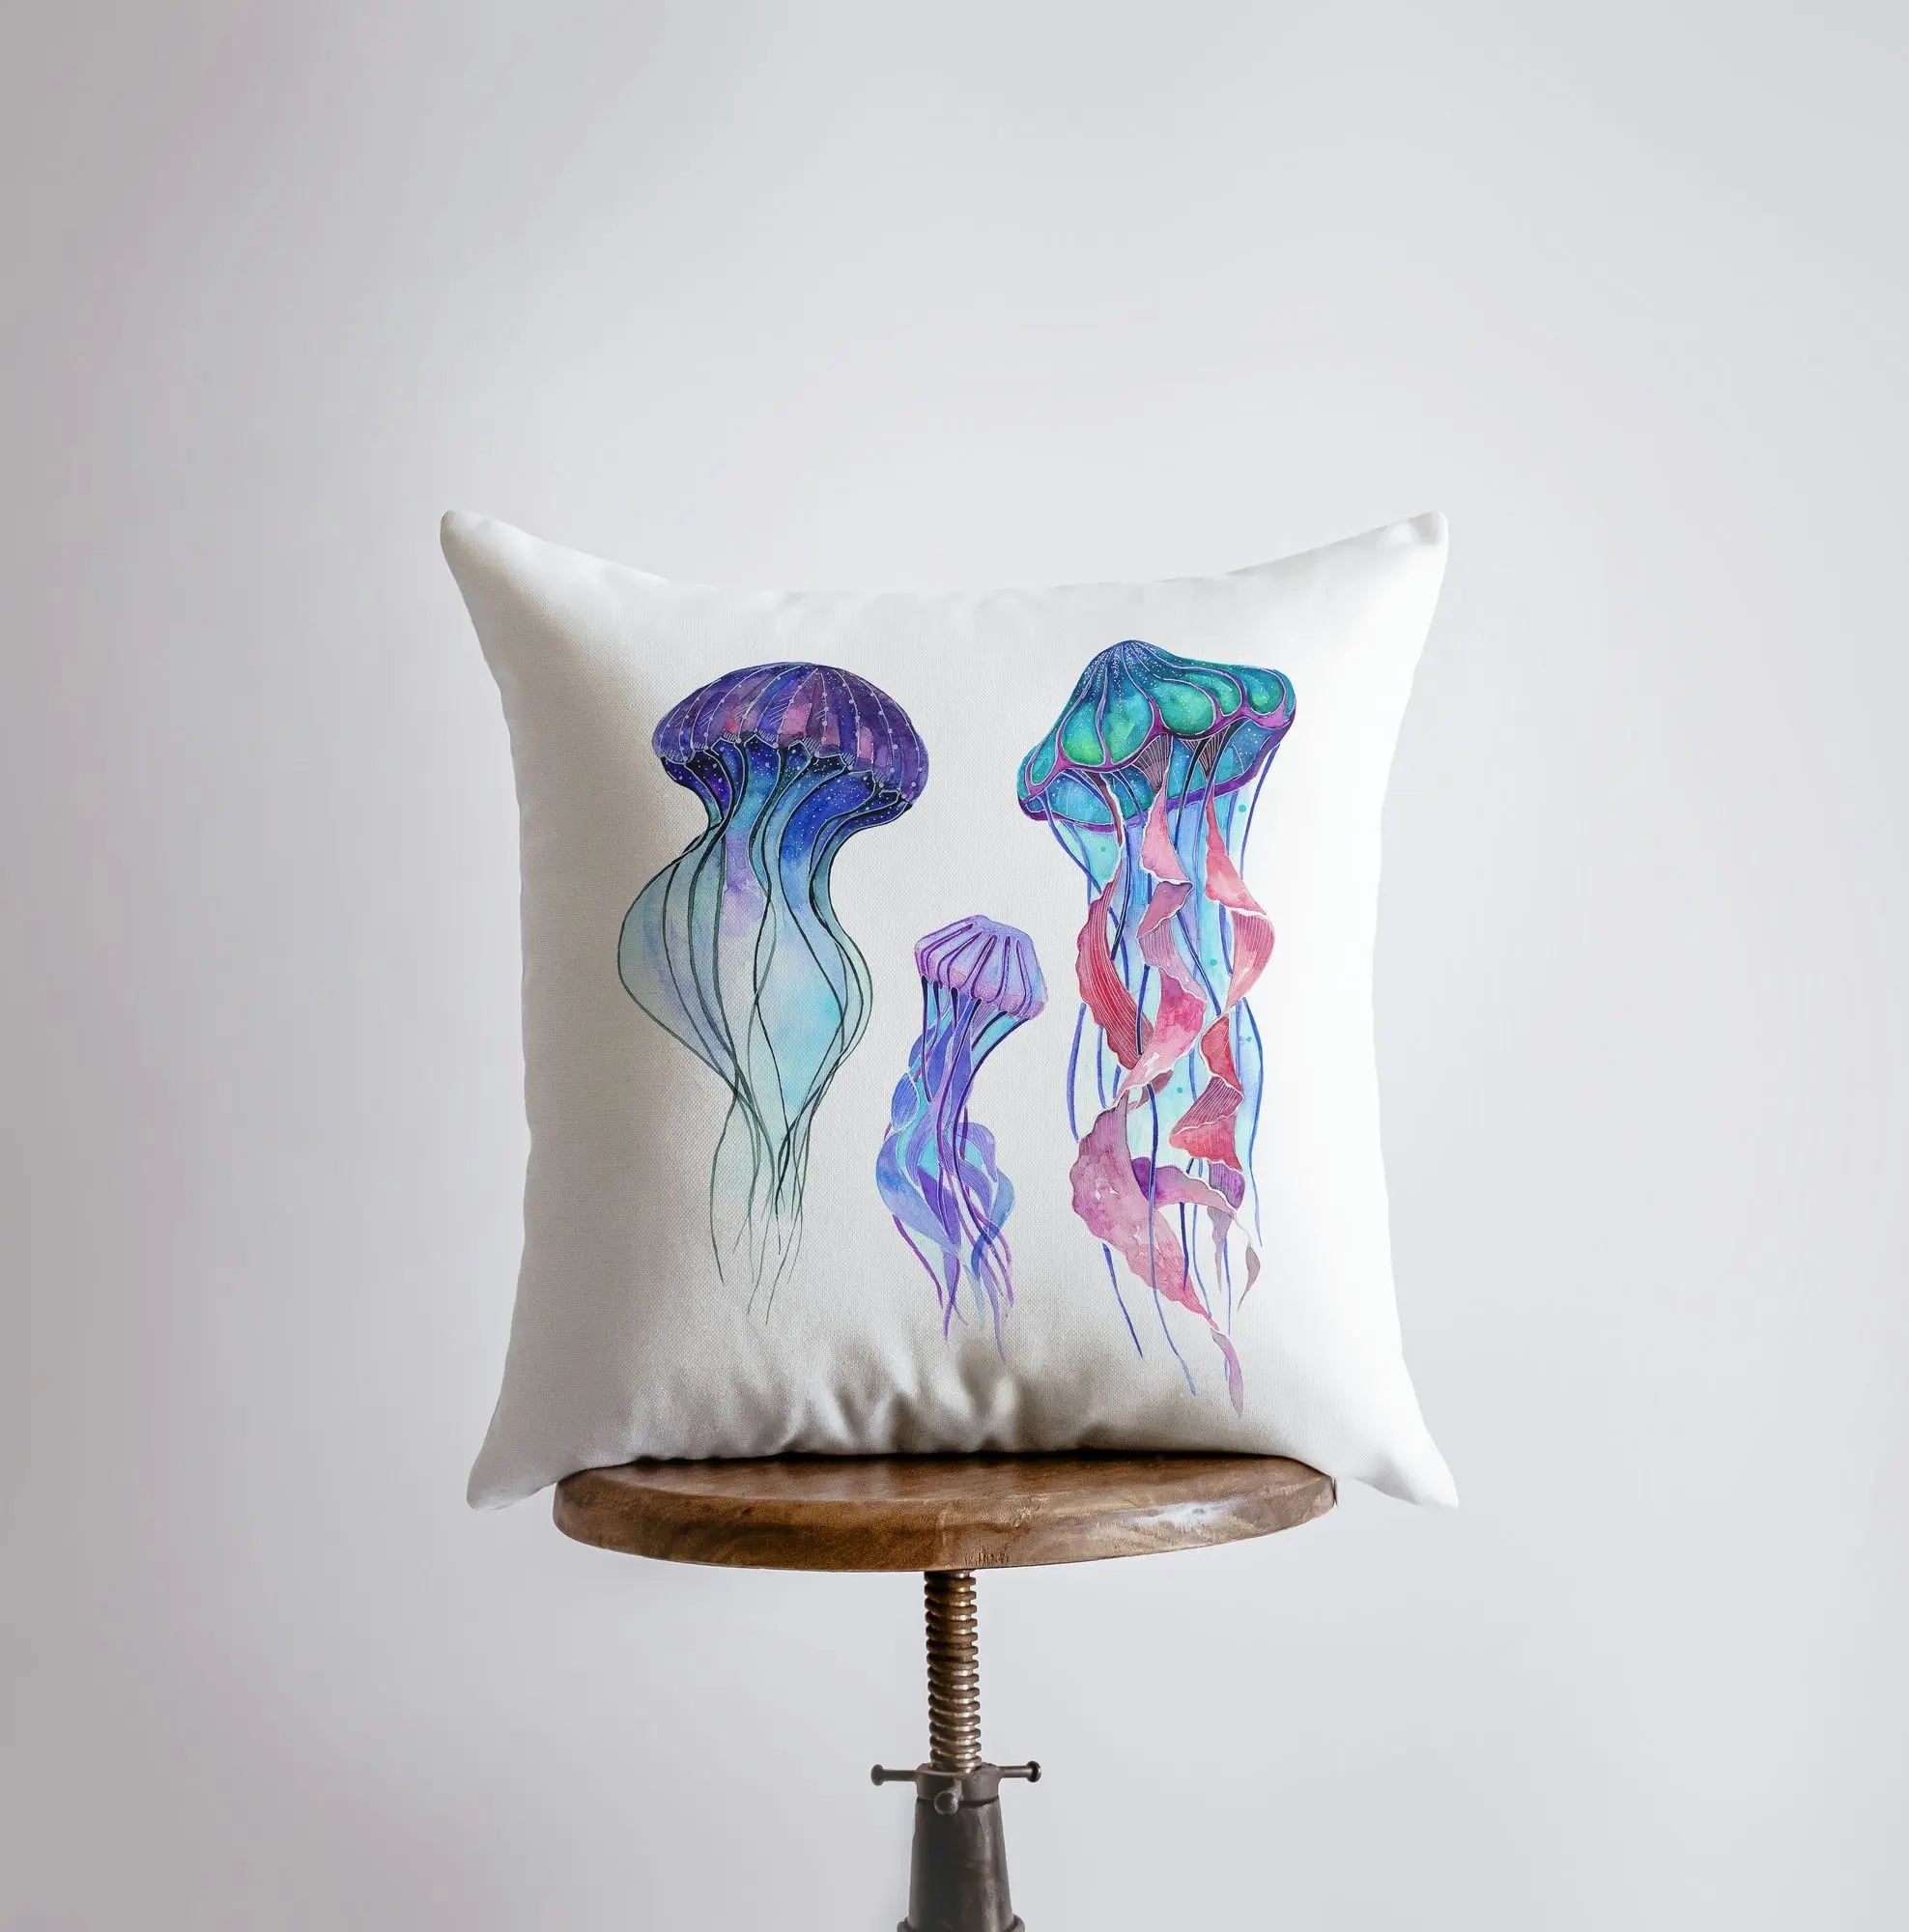 Blue Jelly Fish | Pillow Cover | Throw Pillow | Home Decor | Modern Coastal Decor | Nautical | Ocean | Gift for Her | Accent Pillow | Sea, Size: 10 x